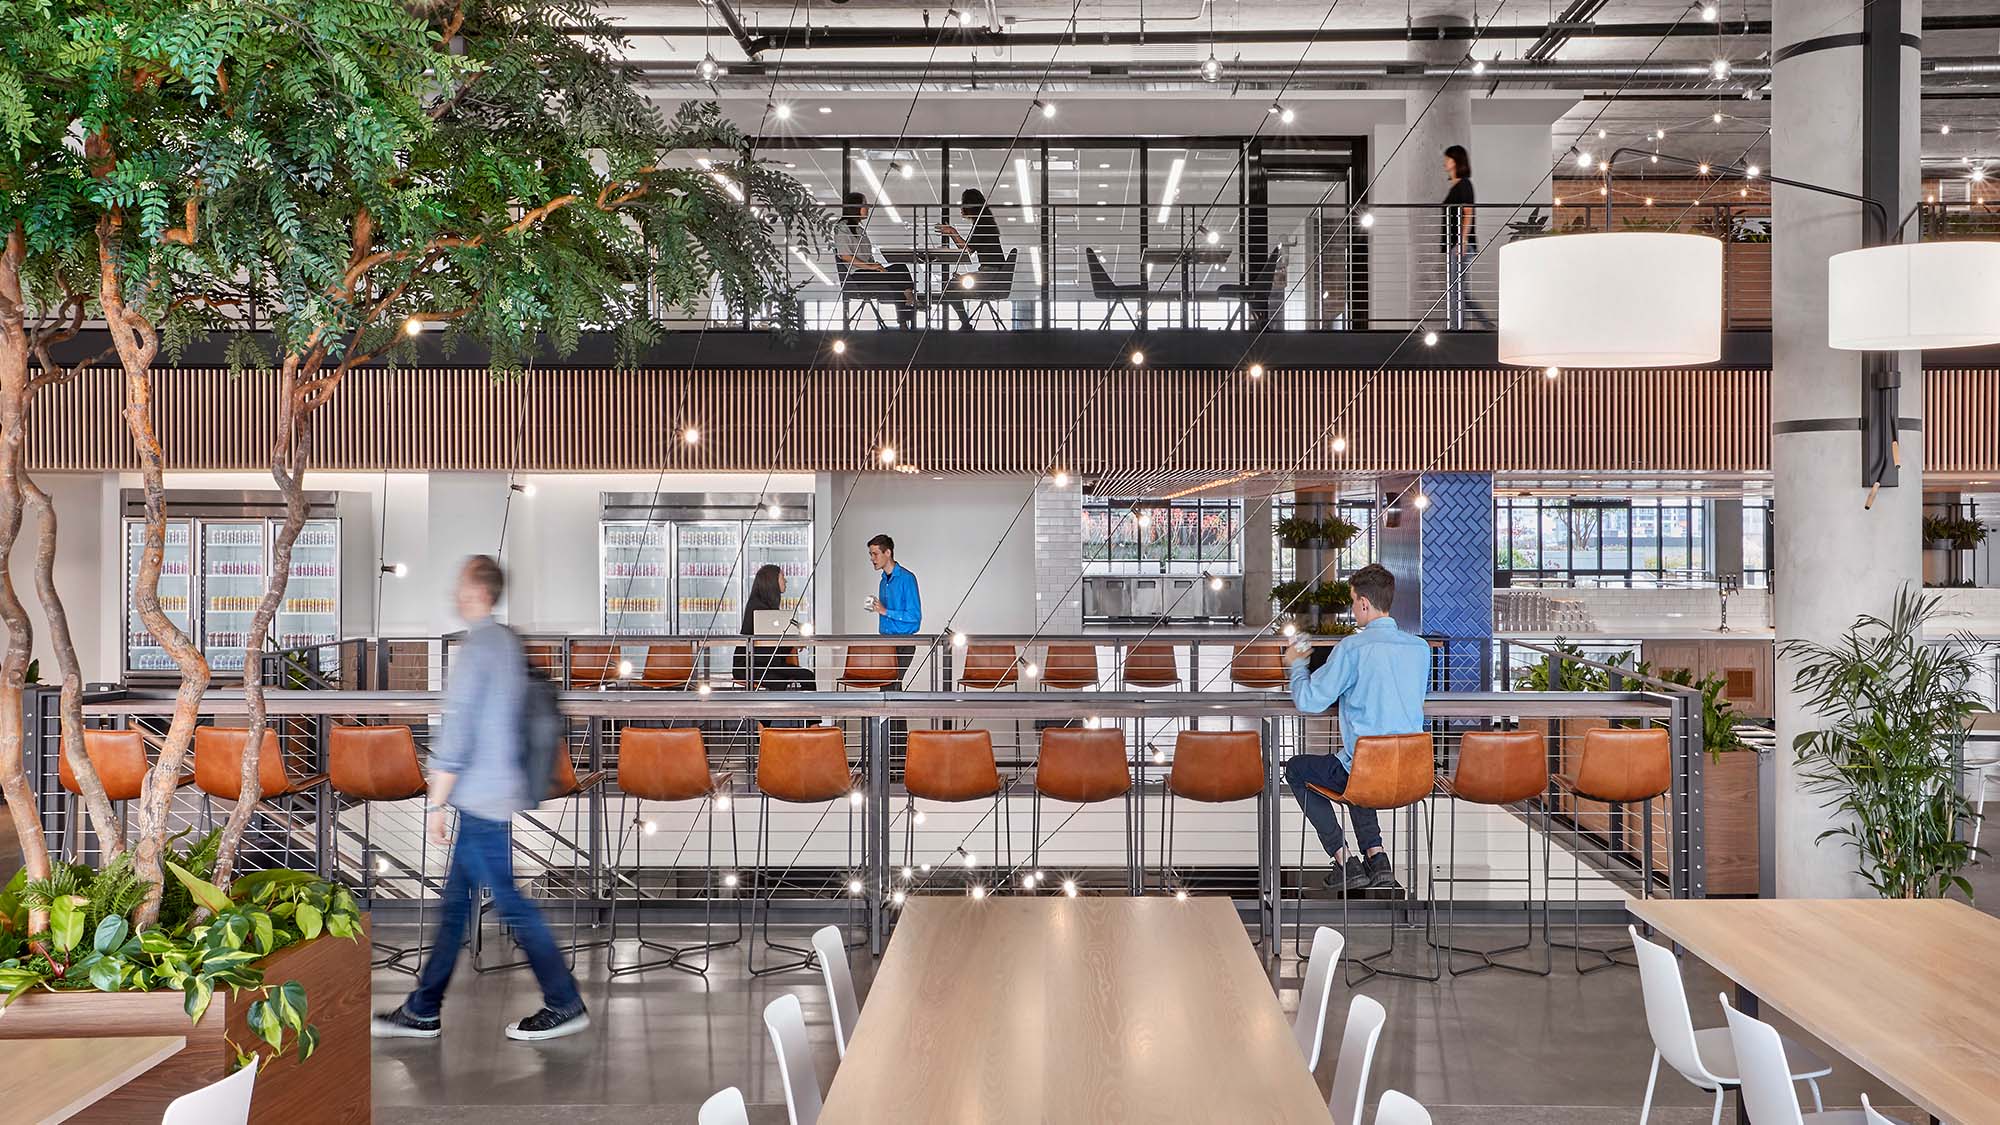 Workplace interior design for a corporate headquarters in San Francisco promotes community and employee experience with a large open dining experience.